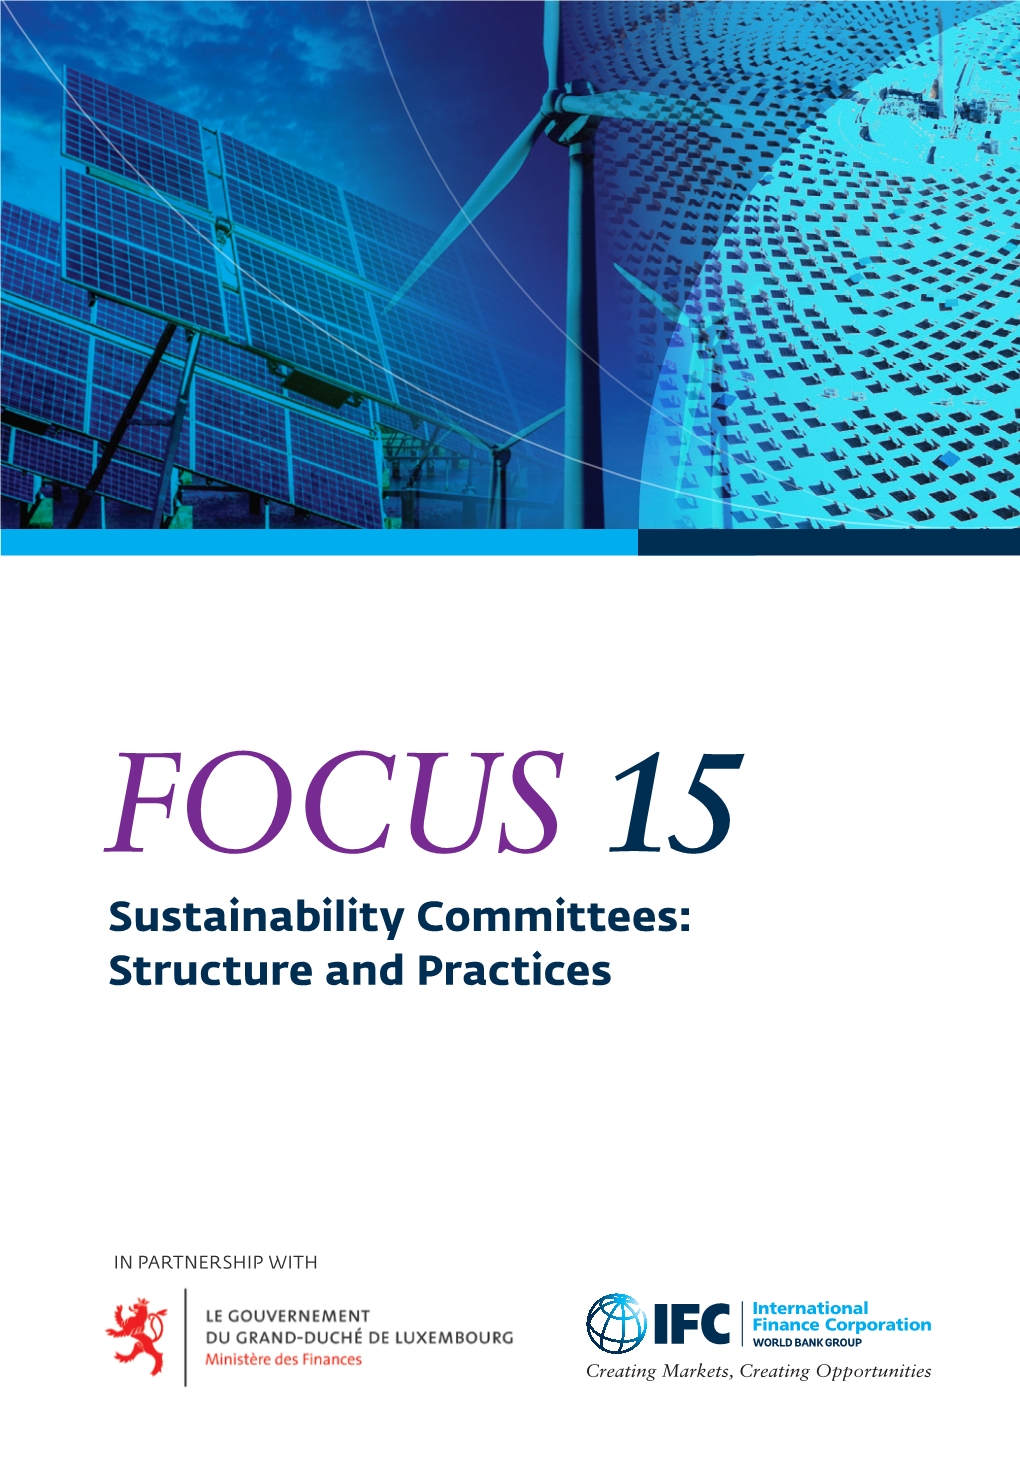 FOCUS 15 Sustainability Committees: Structure and Practices